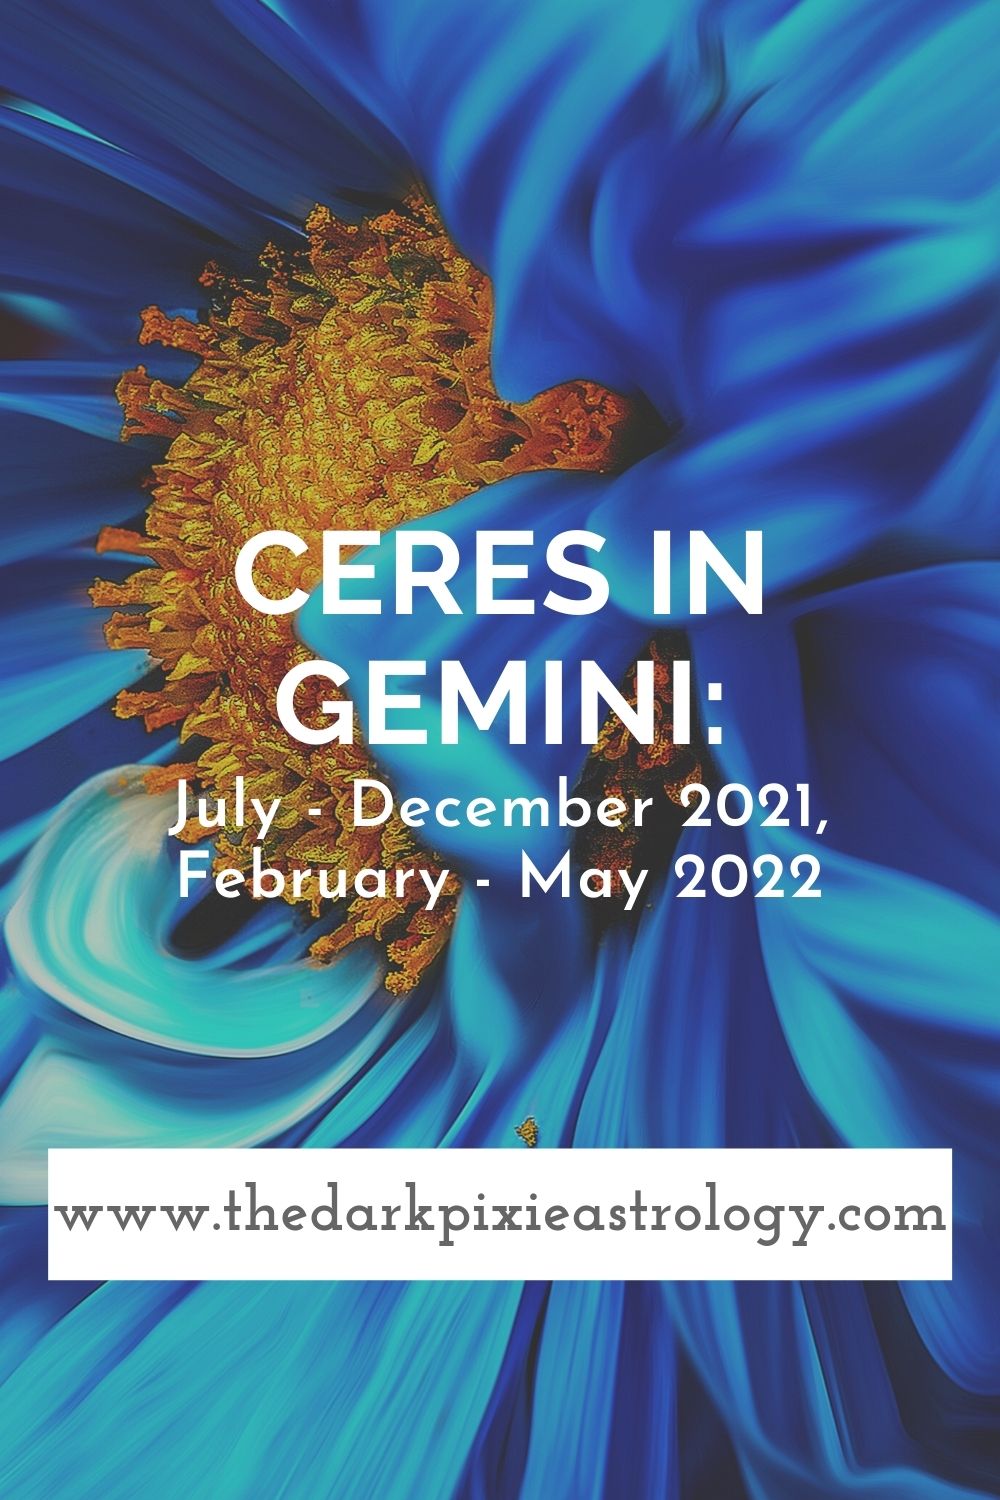 Ceres in Gemini: July - December 2021, February - May 2022 - The Dark Pixie Astrology